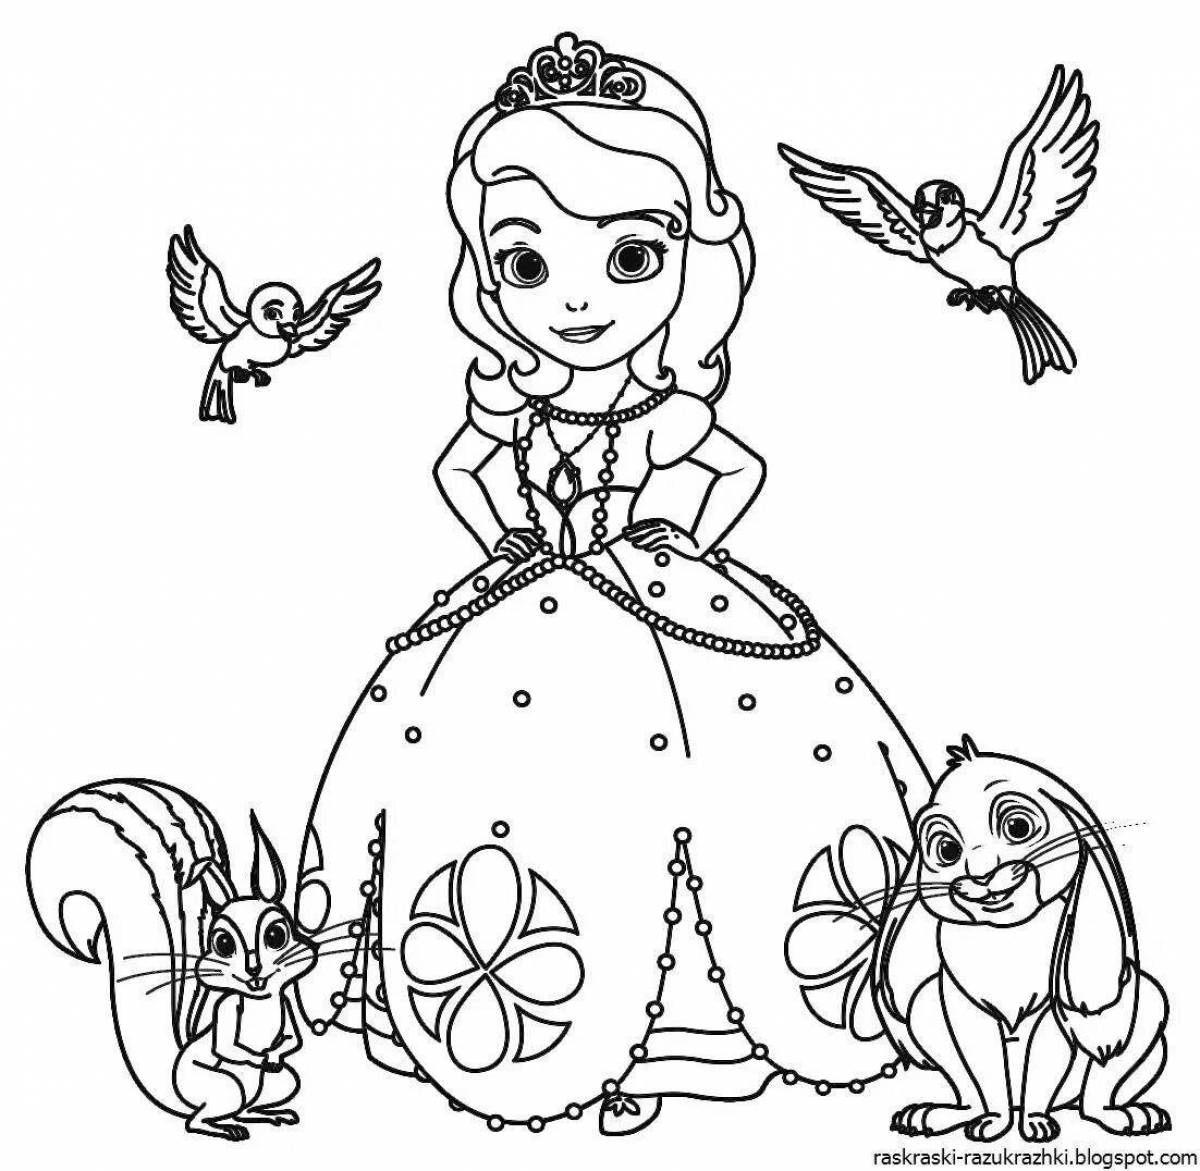 Adorable coloring pages for princesses 4-5 years old